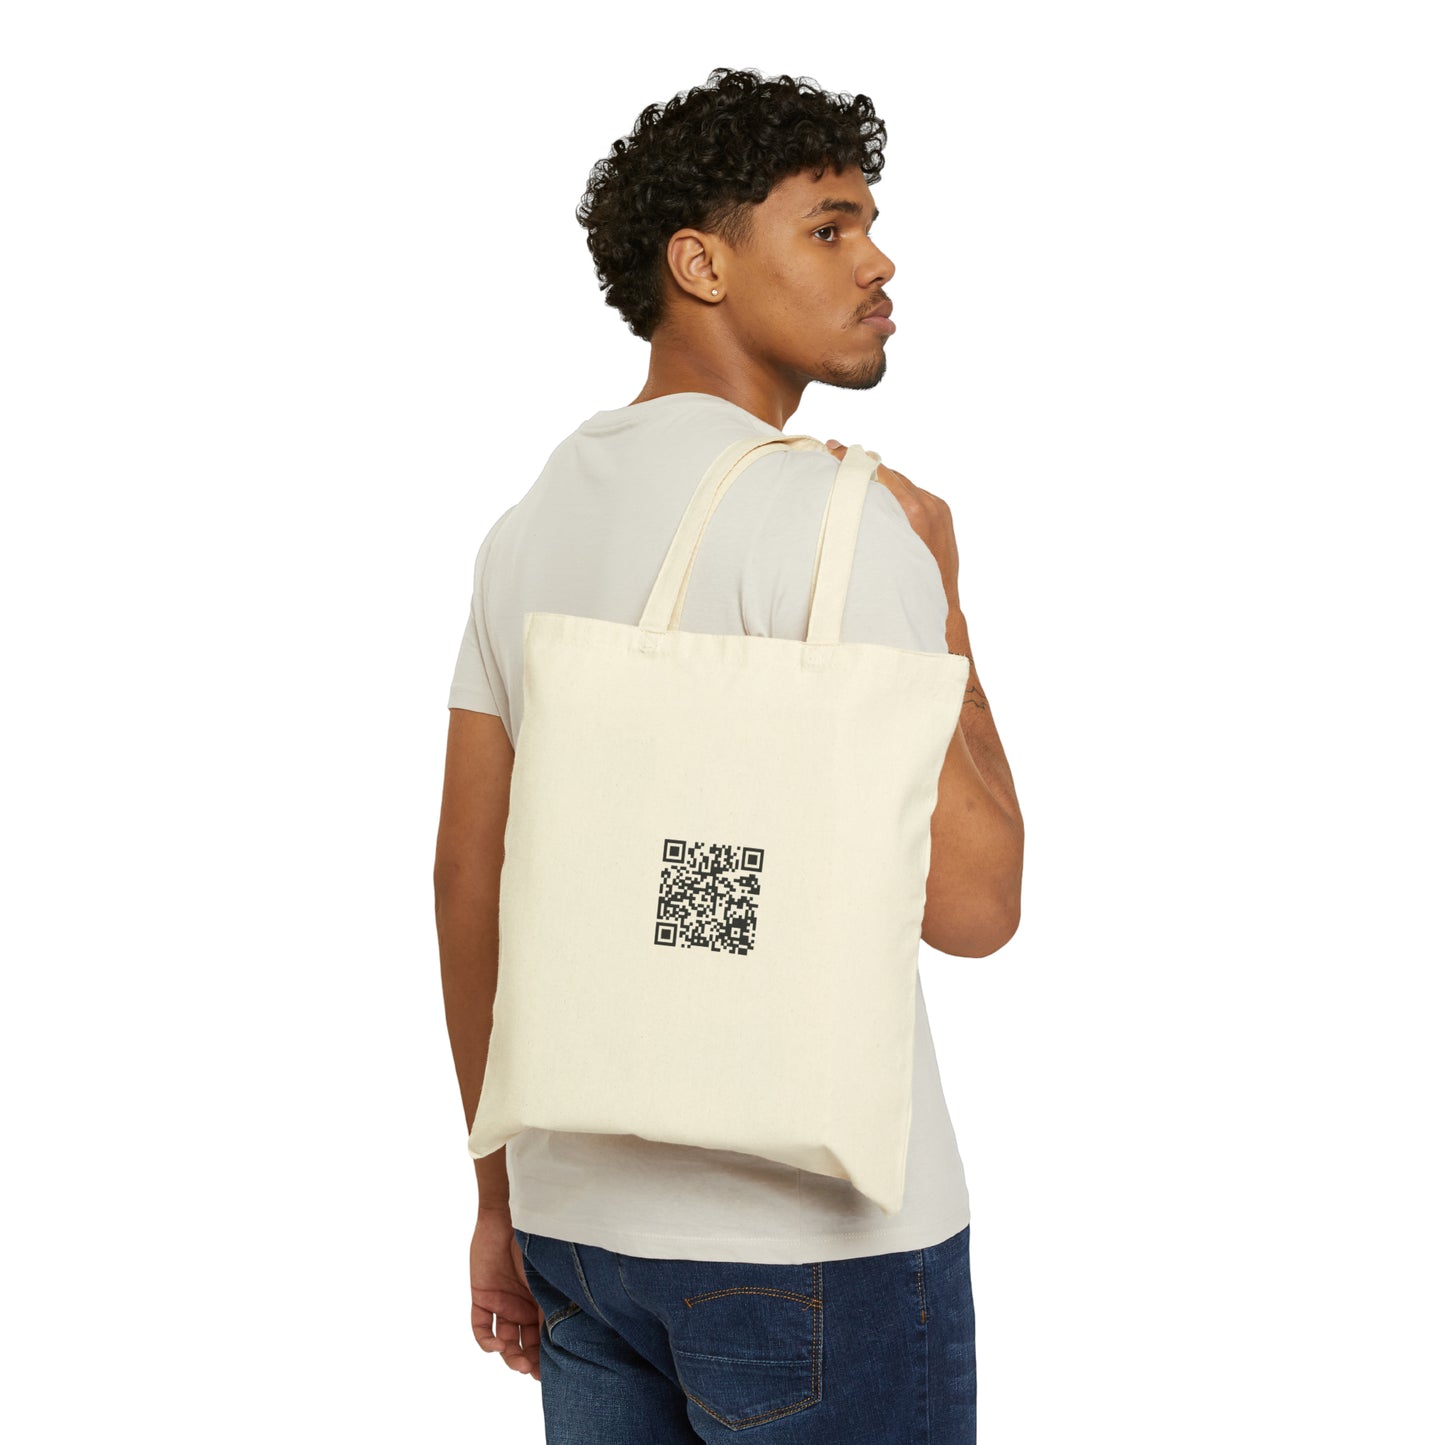 The Insiders' Club - Cotton Canvas Tote Bag